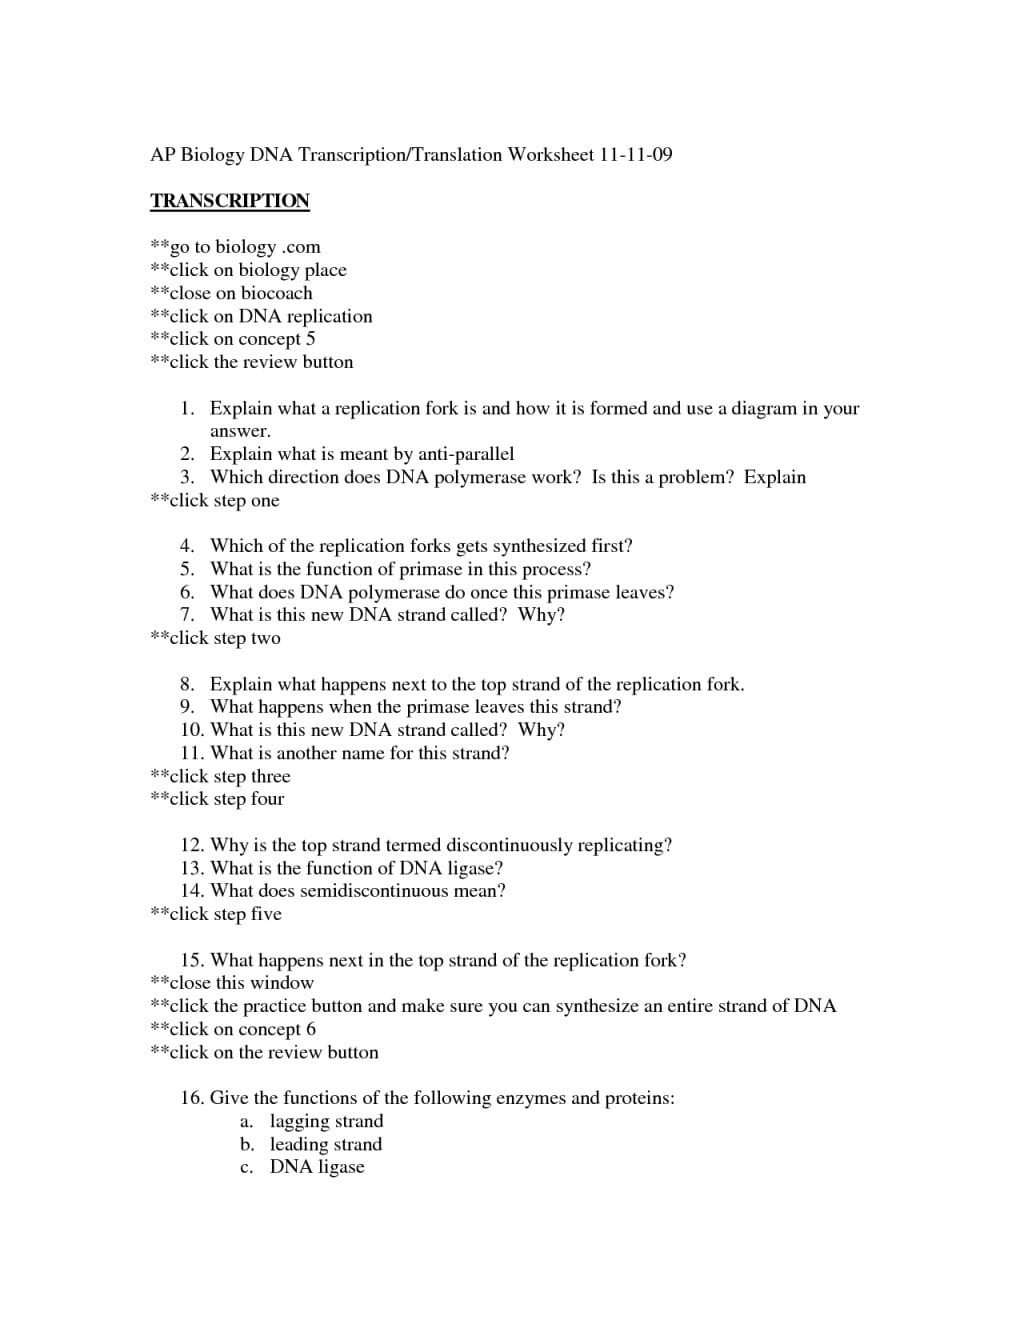 Transcription And Translation Practice Worksheet Answers  Newatvs Inside Transcription And Translation Practice Worksheet